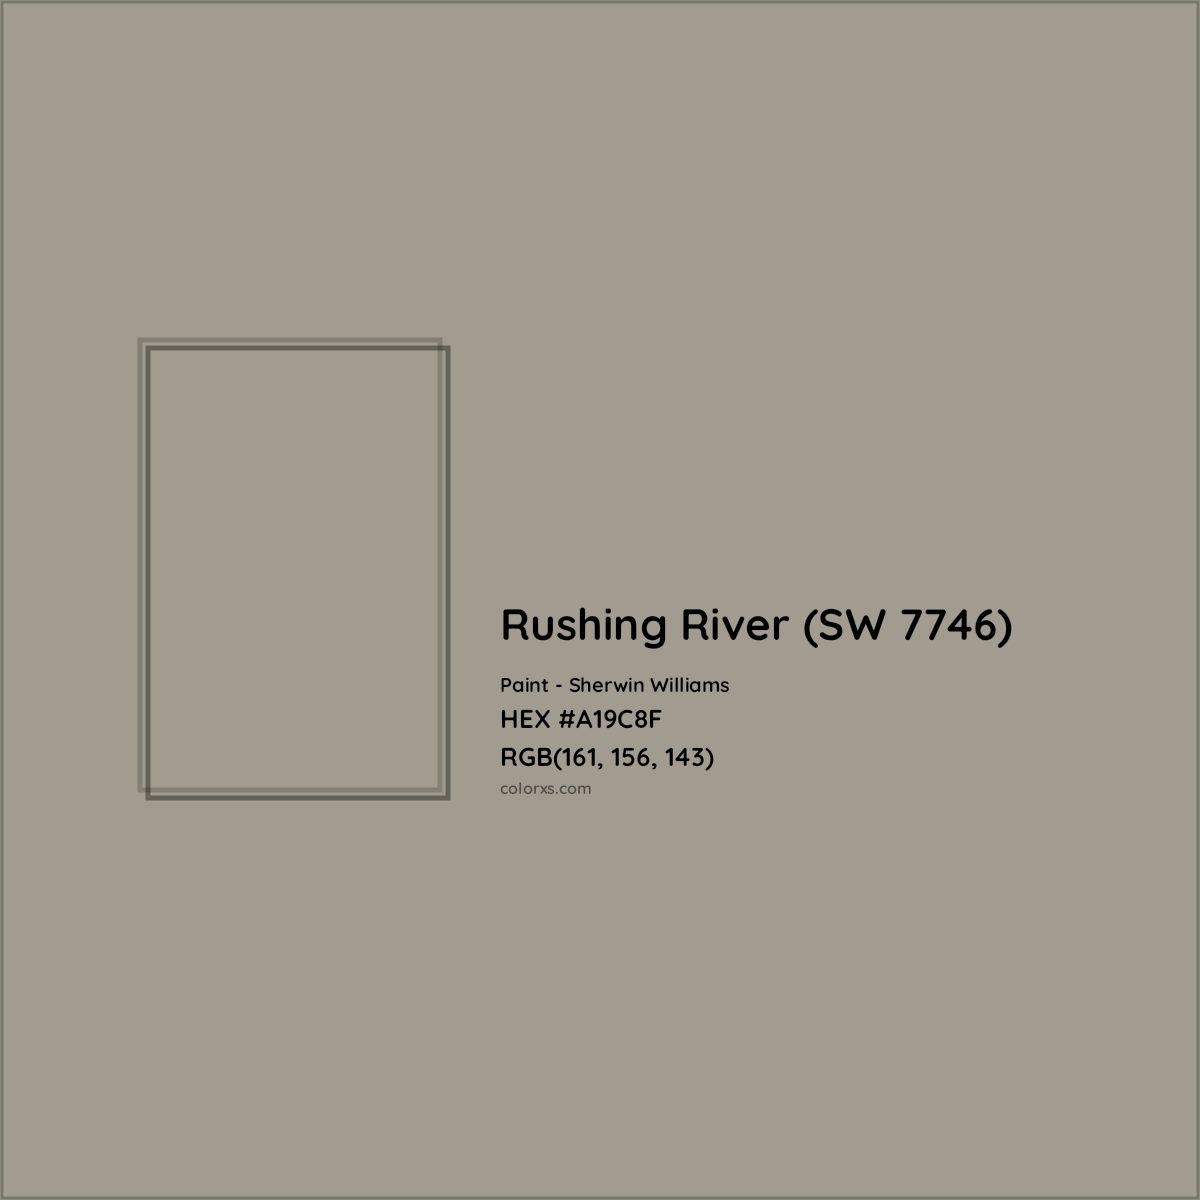 HEX #A19C8F Rushing River (SW 7746) Paint Sherwin Williams - Color Code